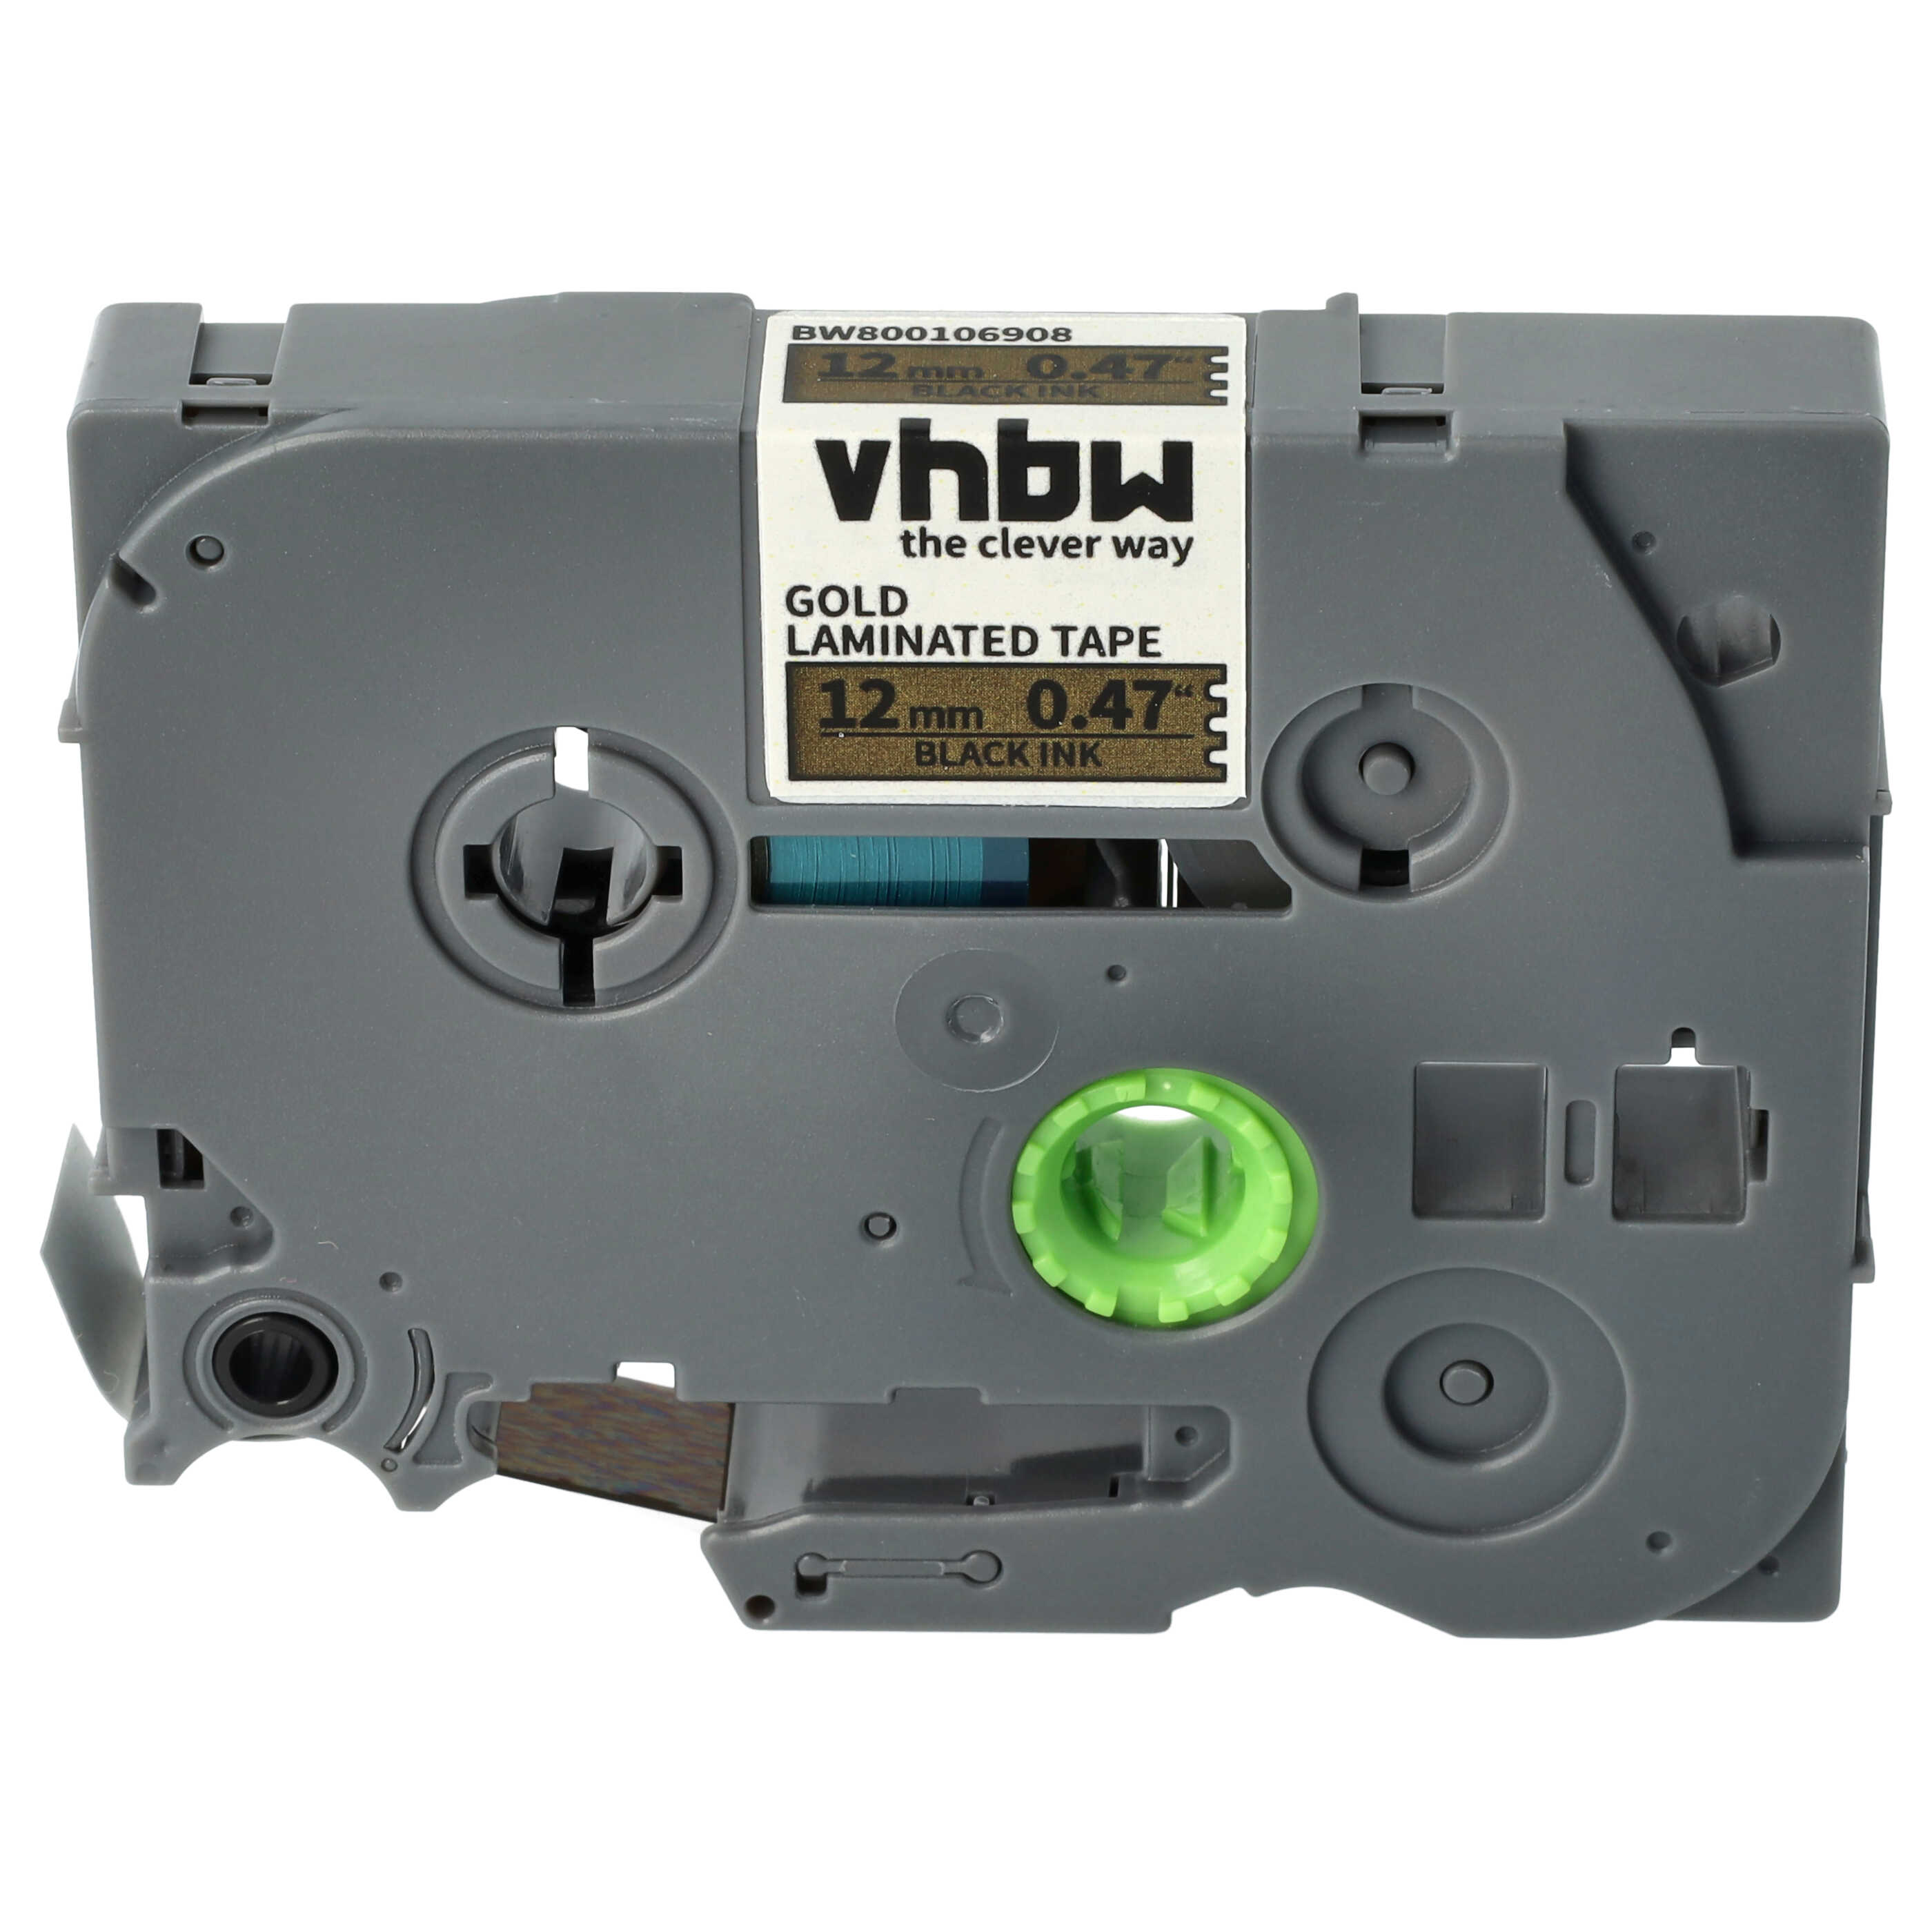 Label Tape as Replacement for TZ-831, TZE-831 - 12 mm Black to Gold